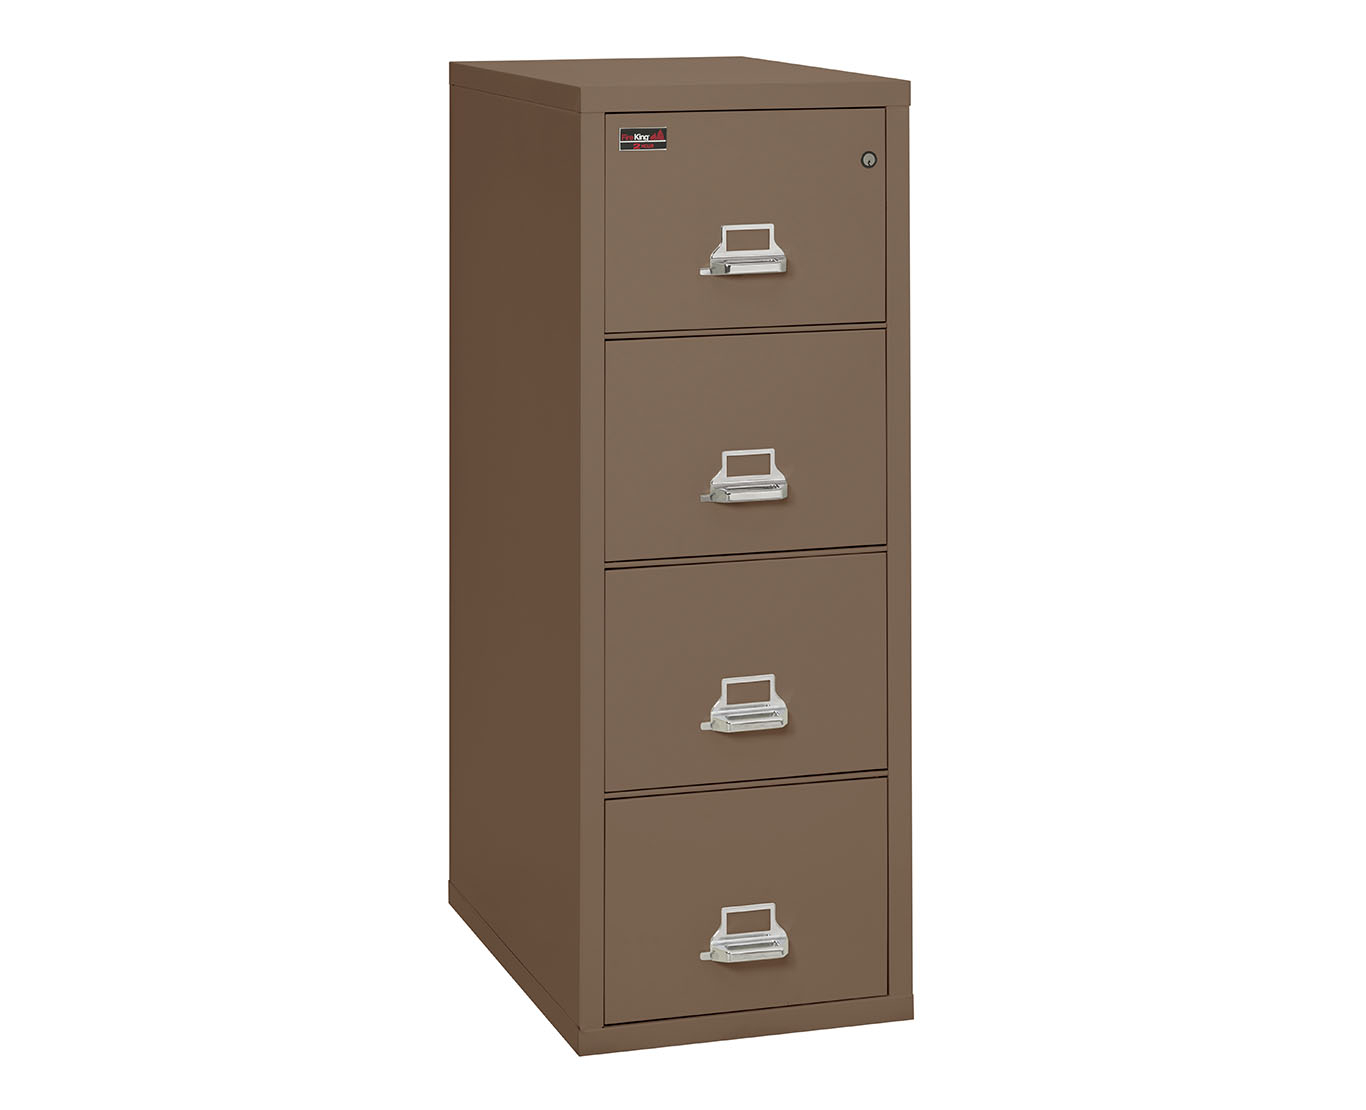 Fireproof File Cabinets 2 Hour Rated Fireking intended for proportions 1366 X 1110